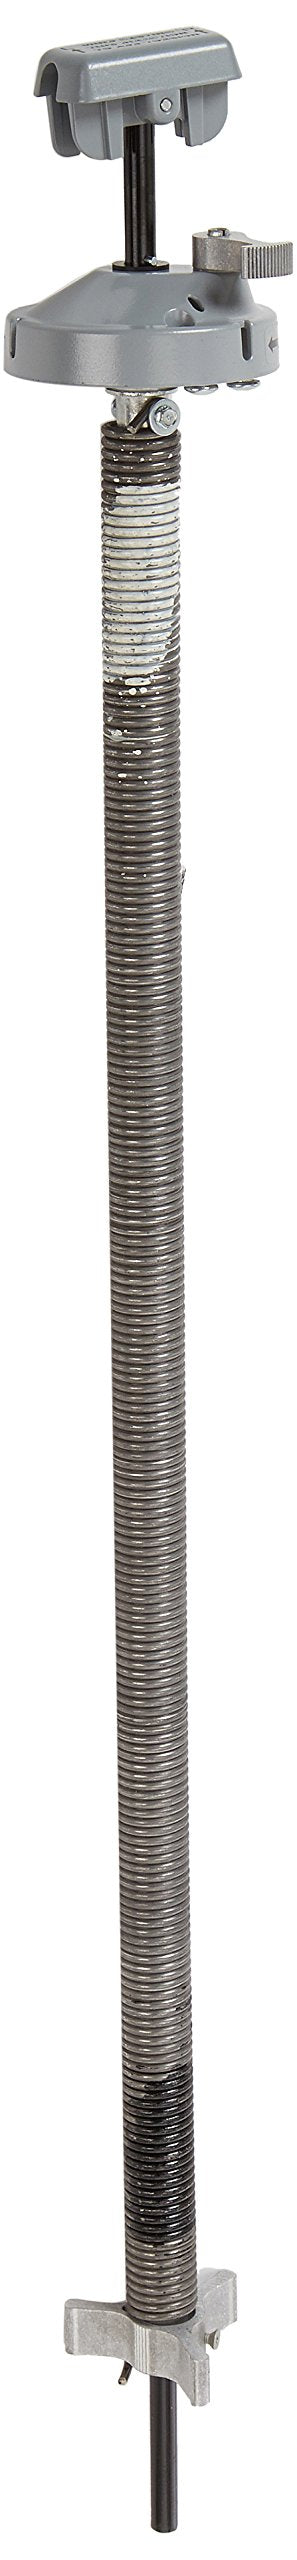 Dometic 3108398.029 A&E Heavy Duty Right Hand Patio Awning Spring